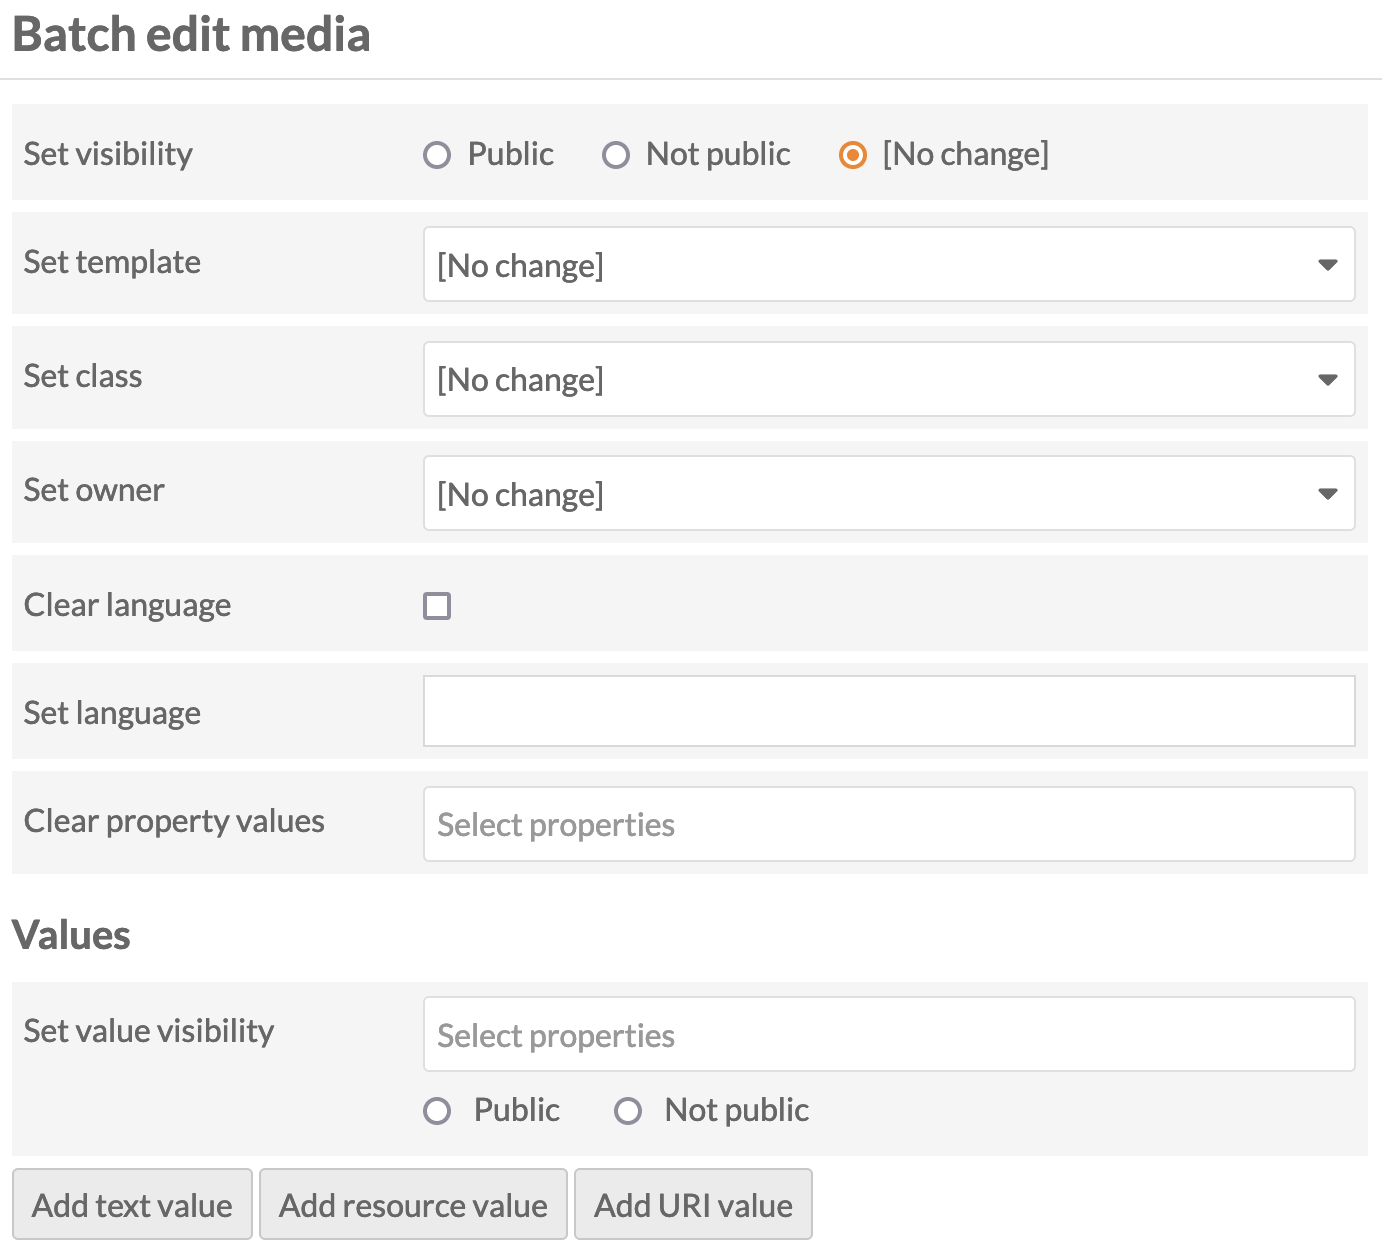 Batch edit media form, with options as described above.